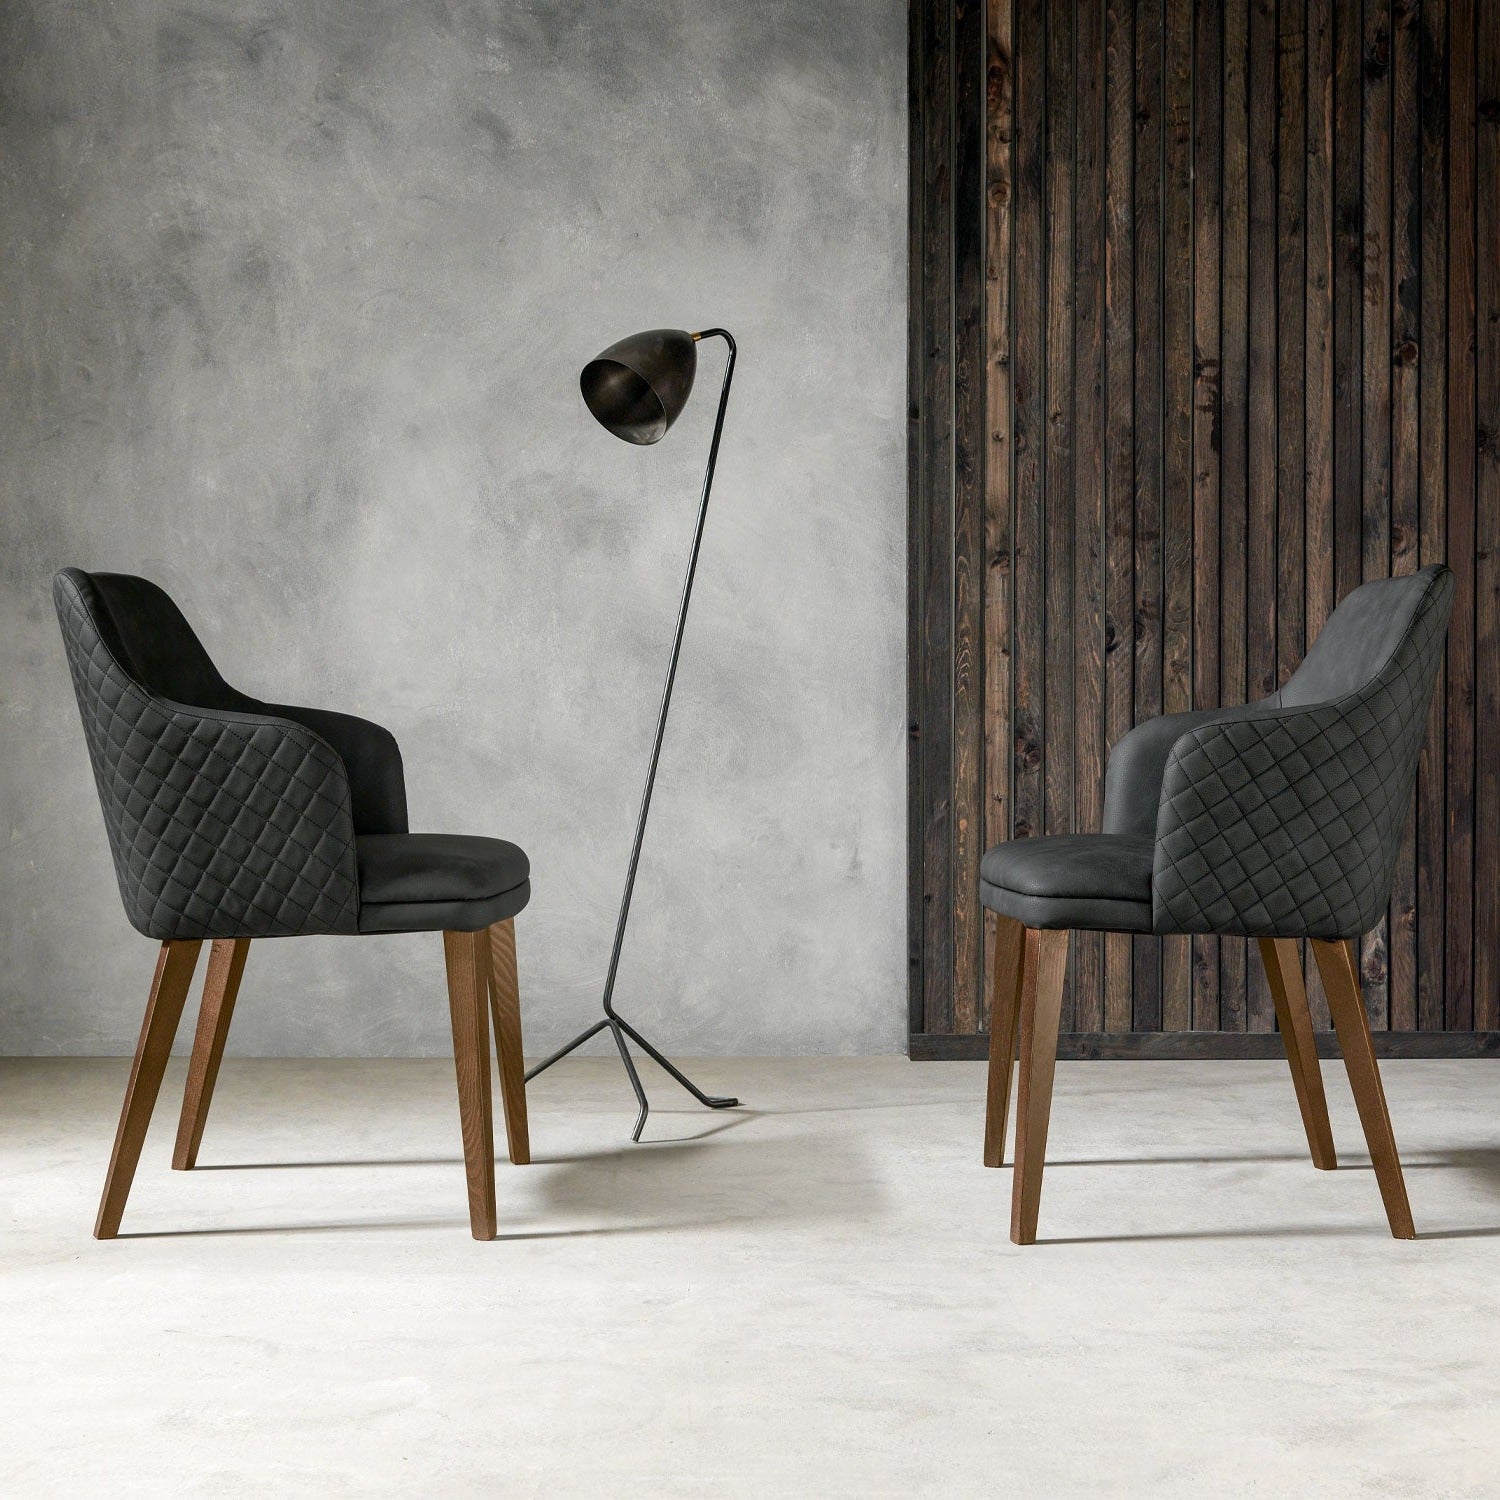 Polly Chair by Compar